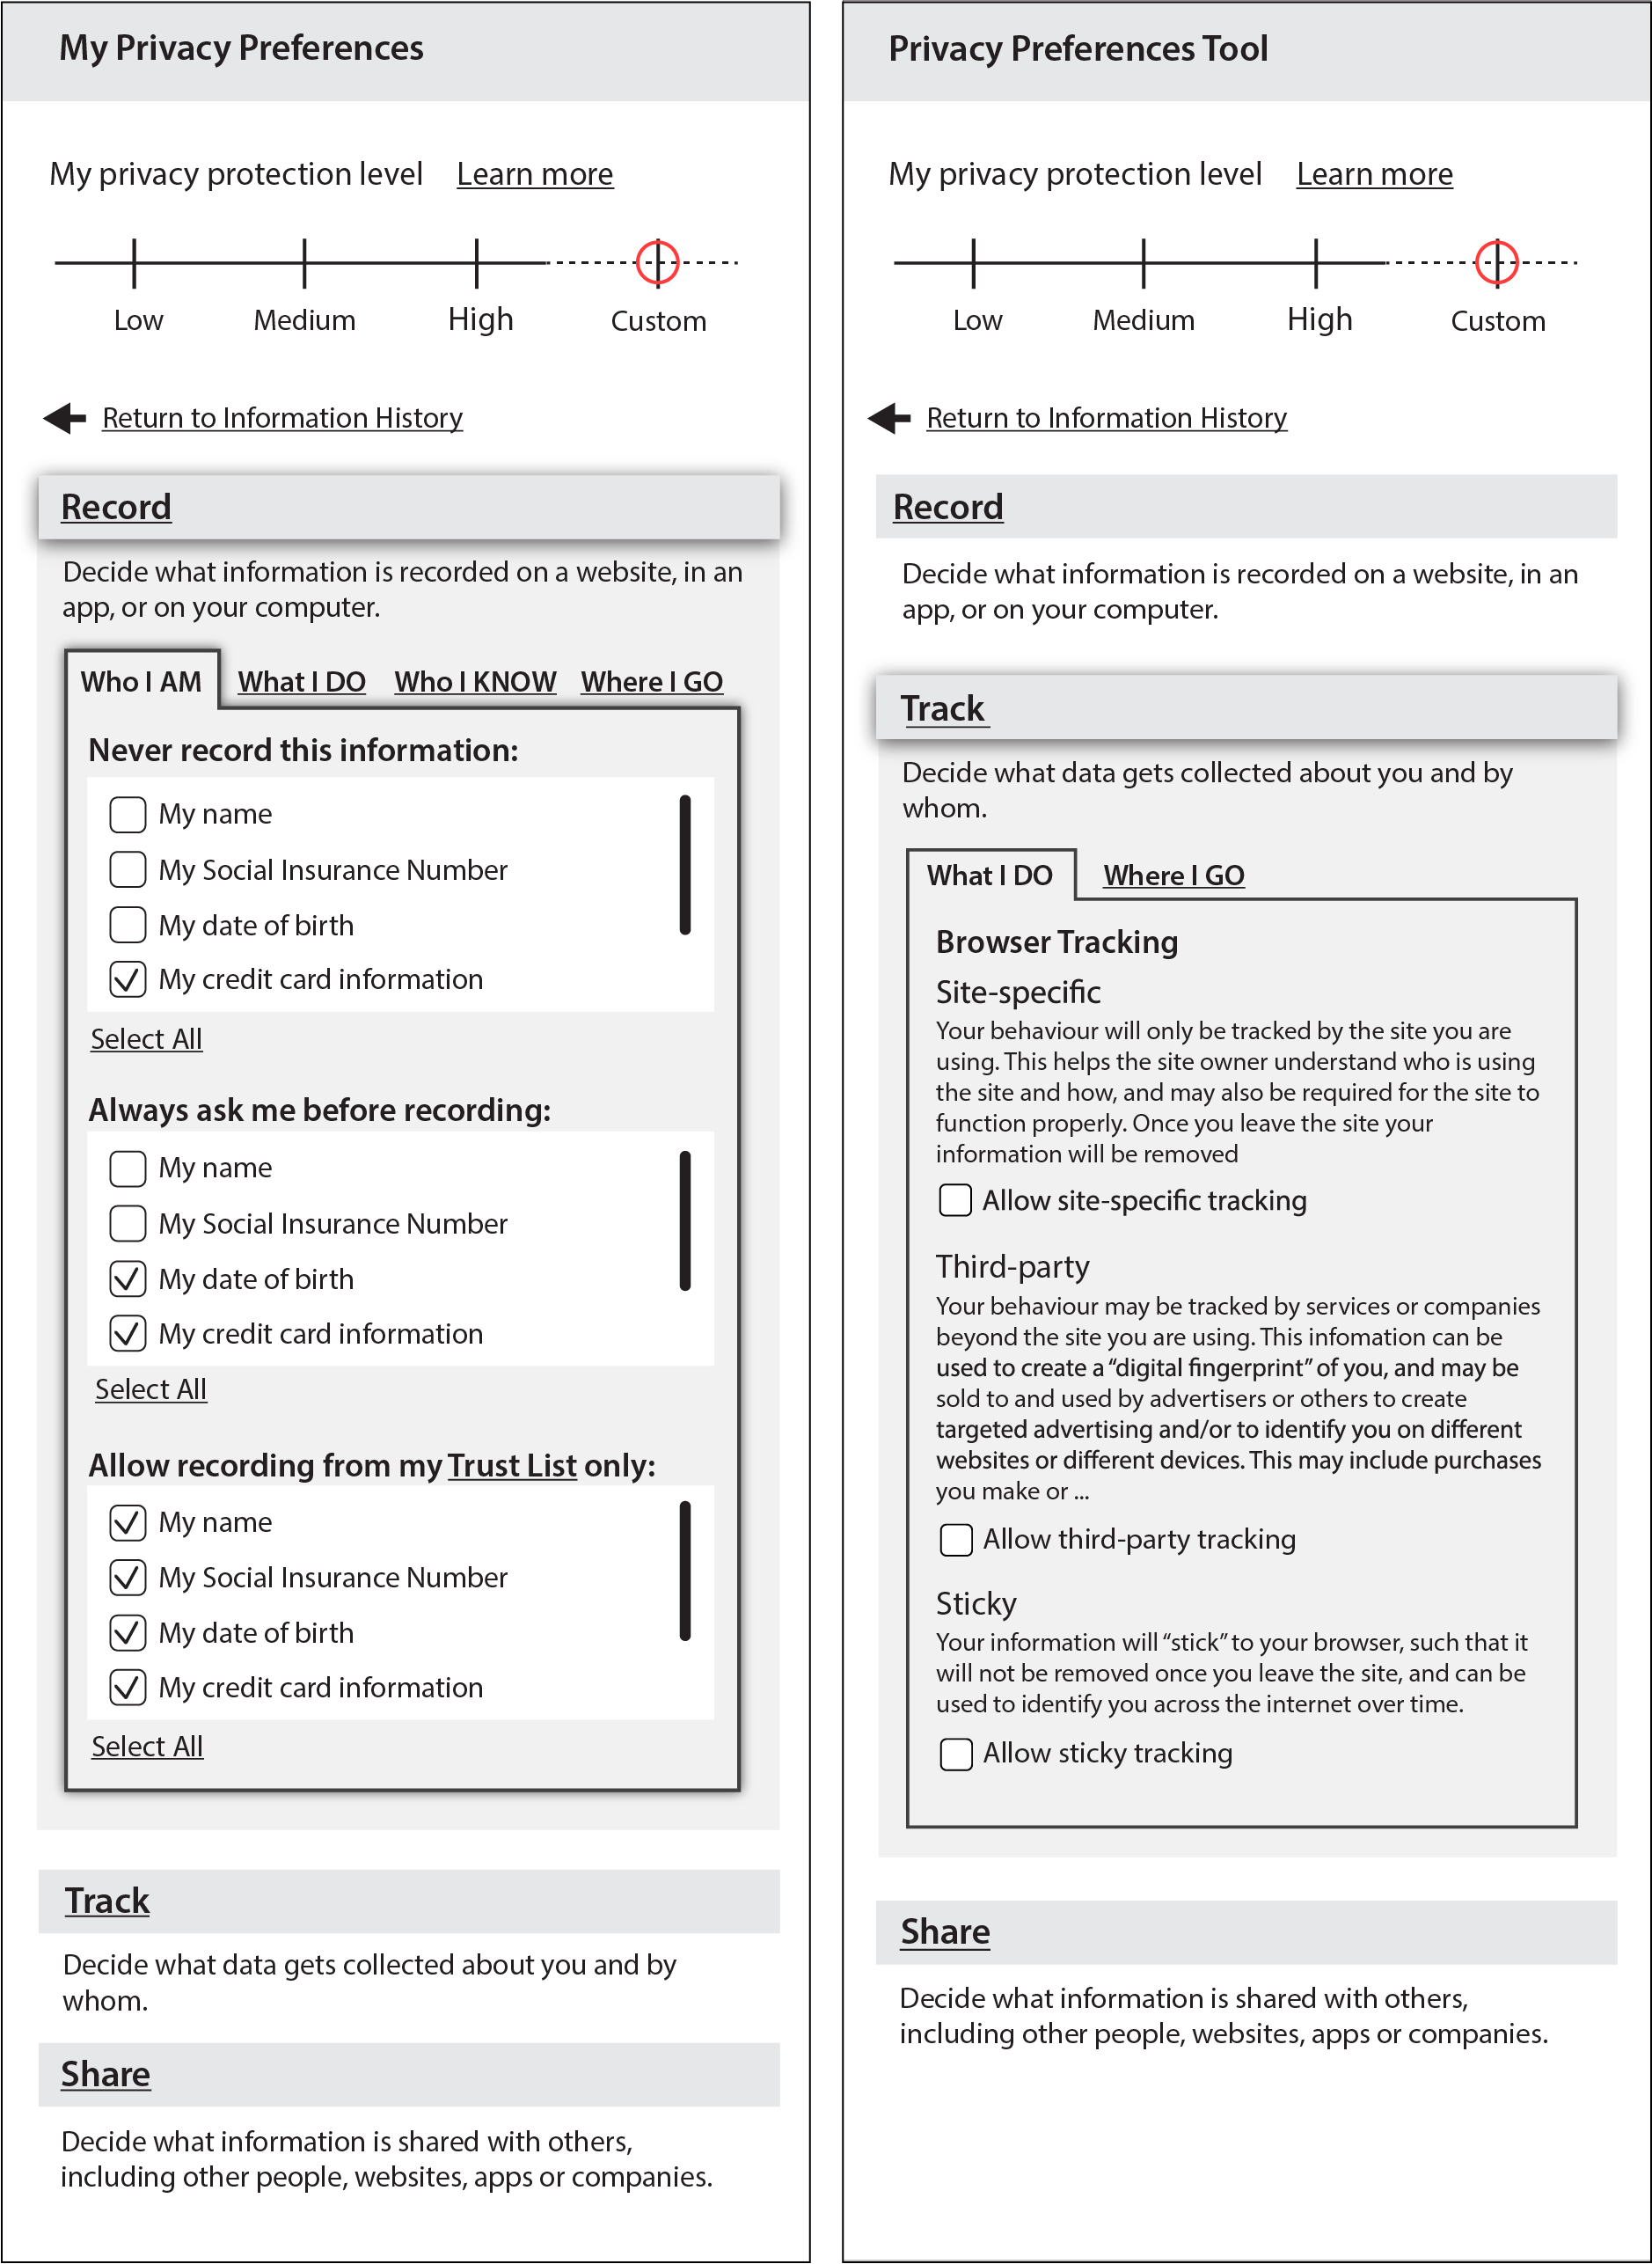 Figure 5. An example of an advanced privacy preferences tool allowing the custom setting of personal privacy preferences.”